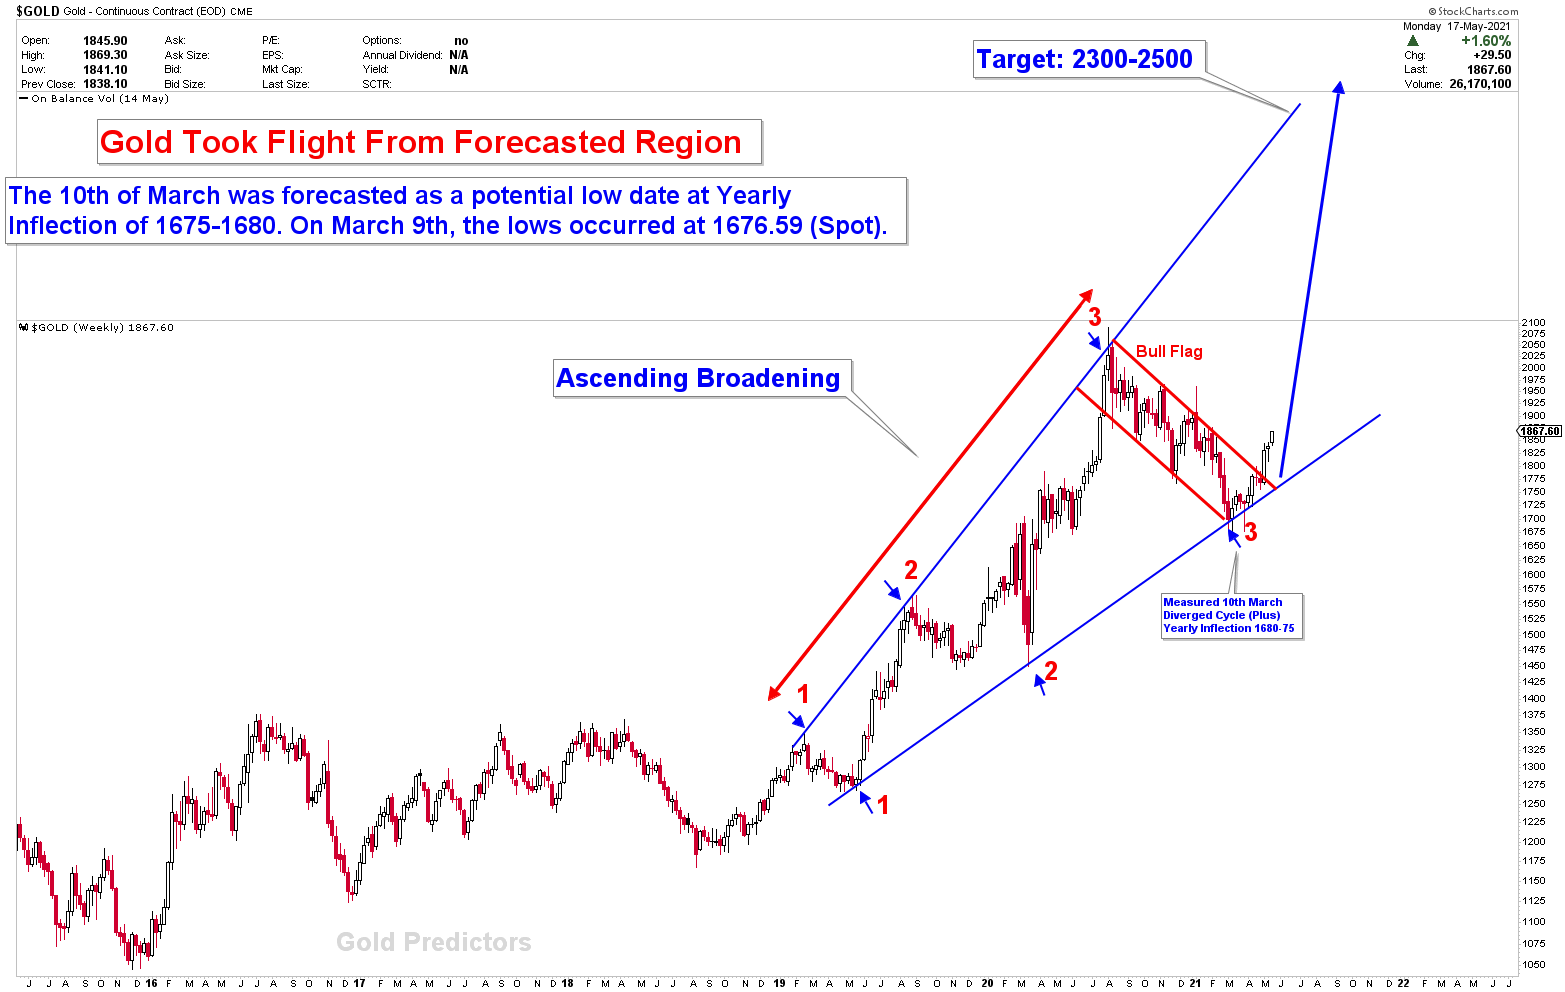 gold buying opportunity